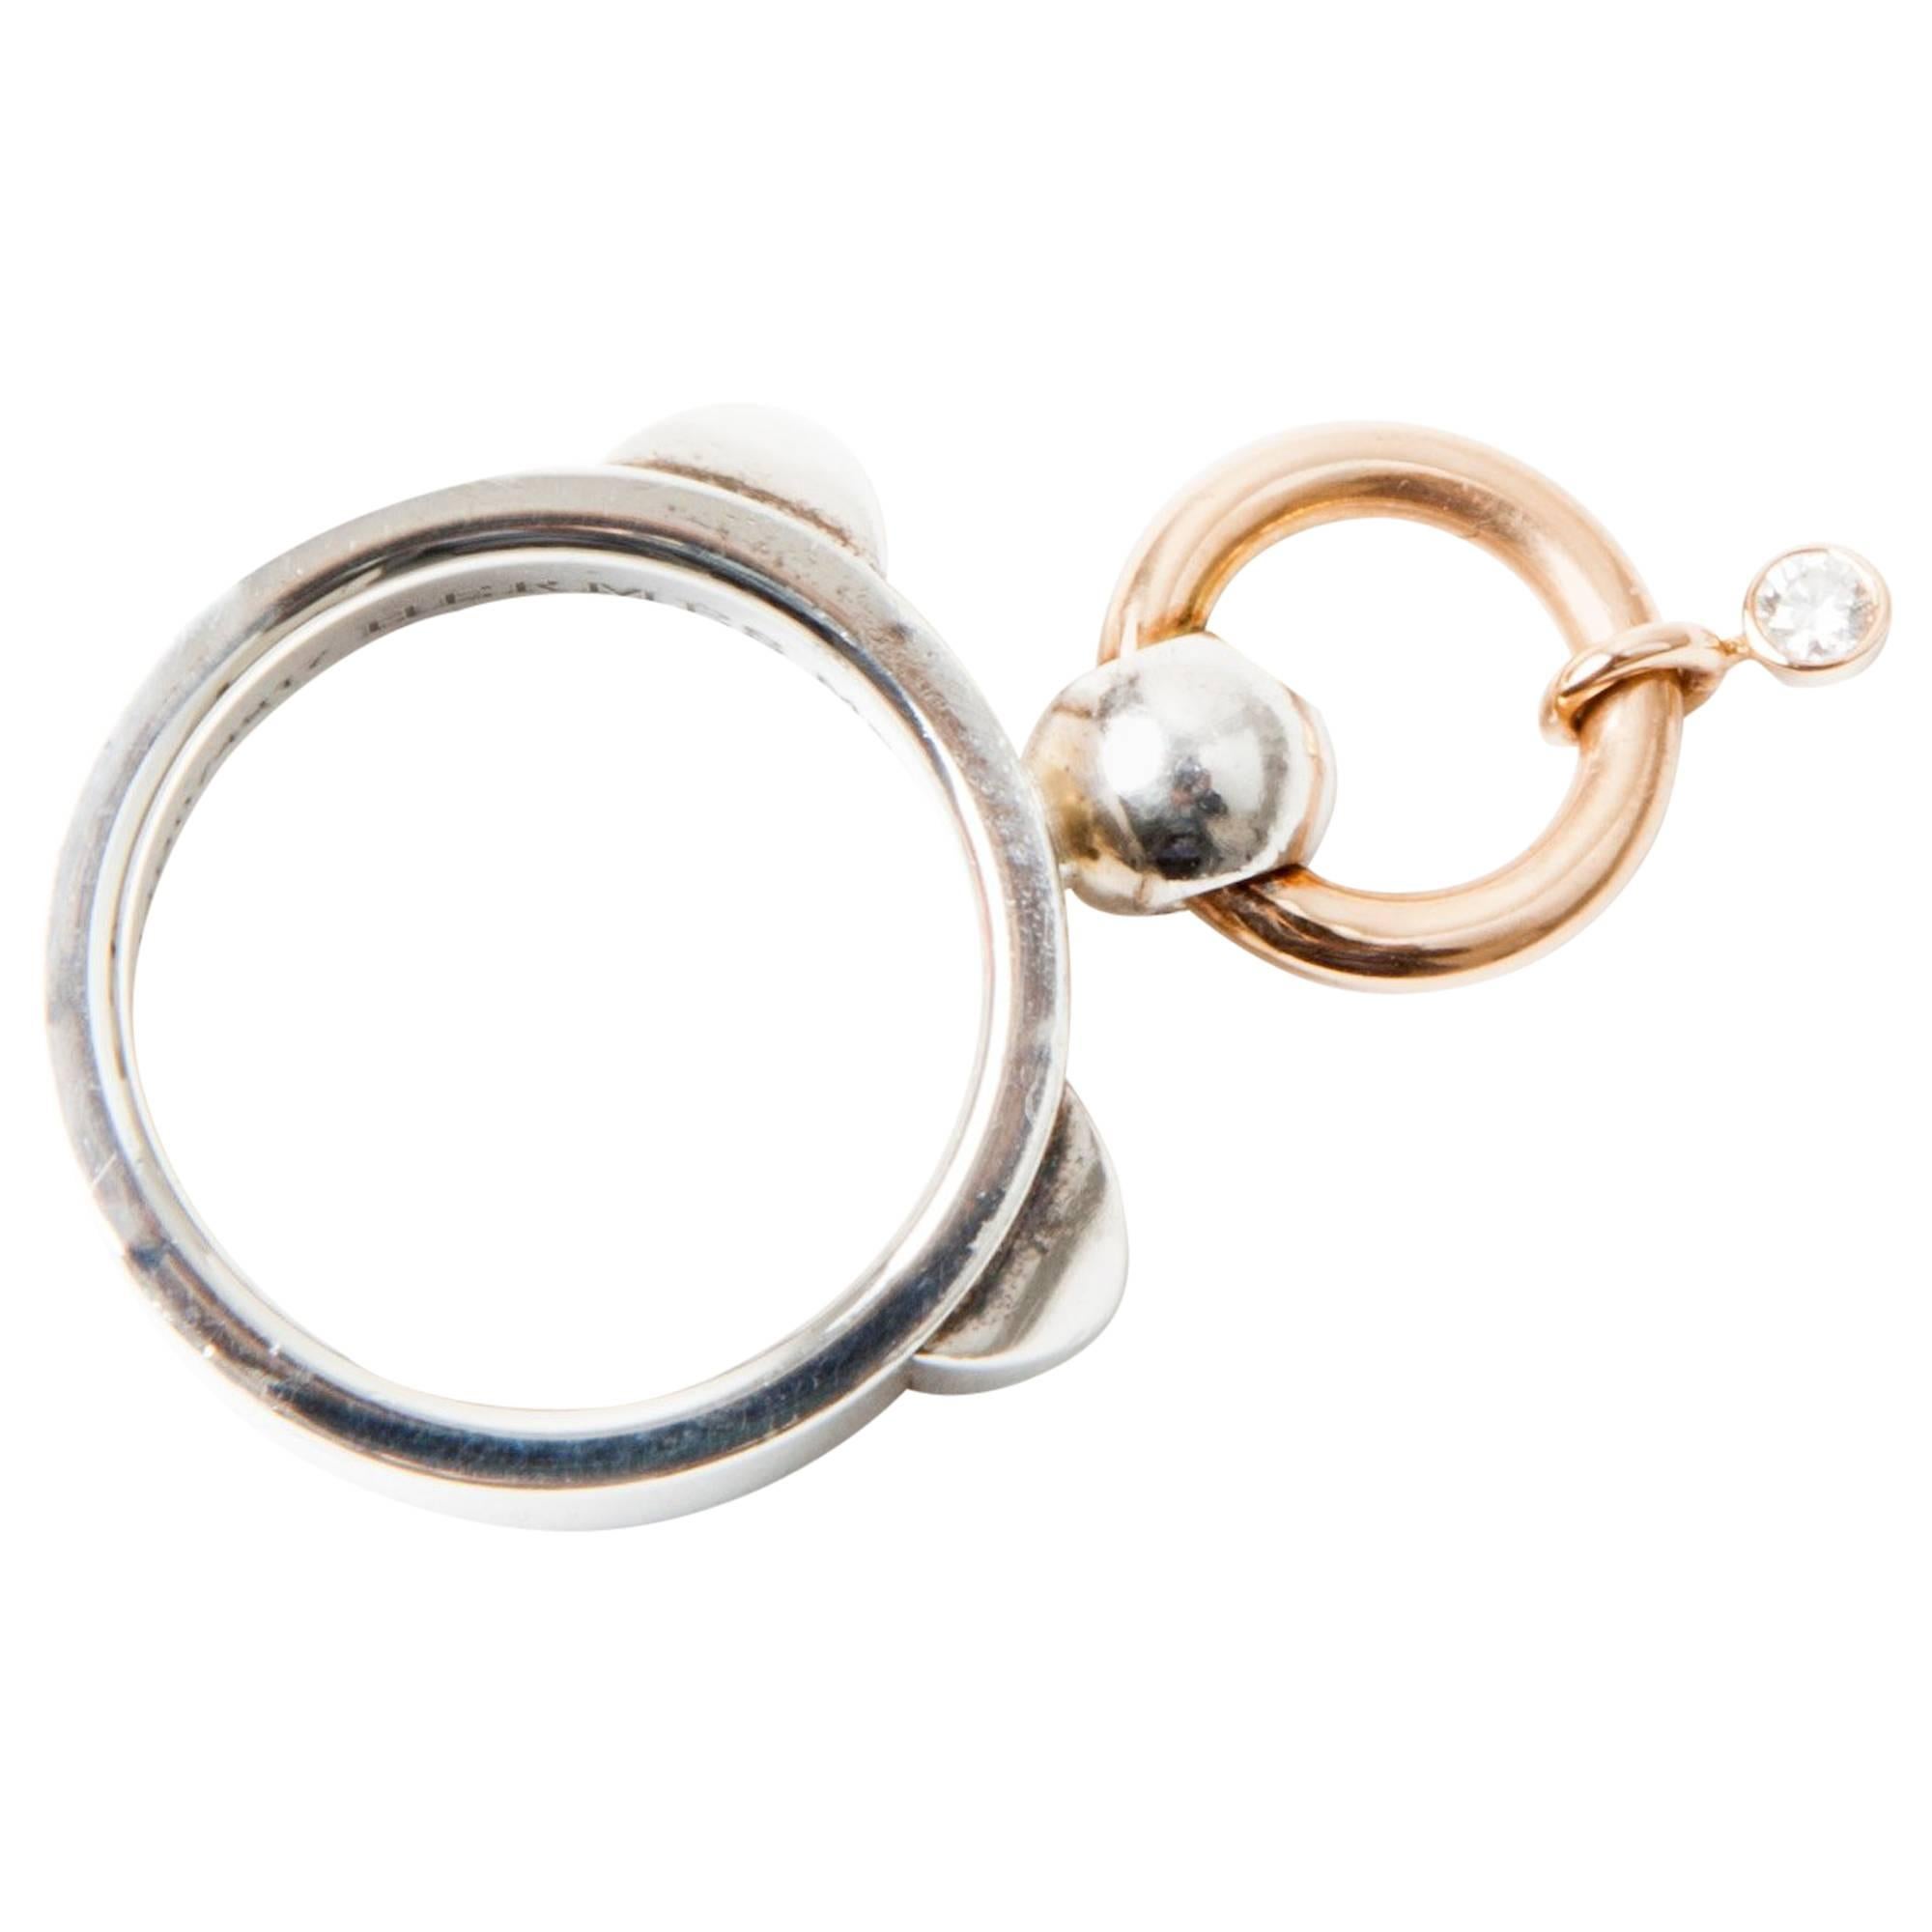 HERMES Ring, Collier de Chien, in Sterling Silver, Gold and Diamond. Size 54 EU For Sale